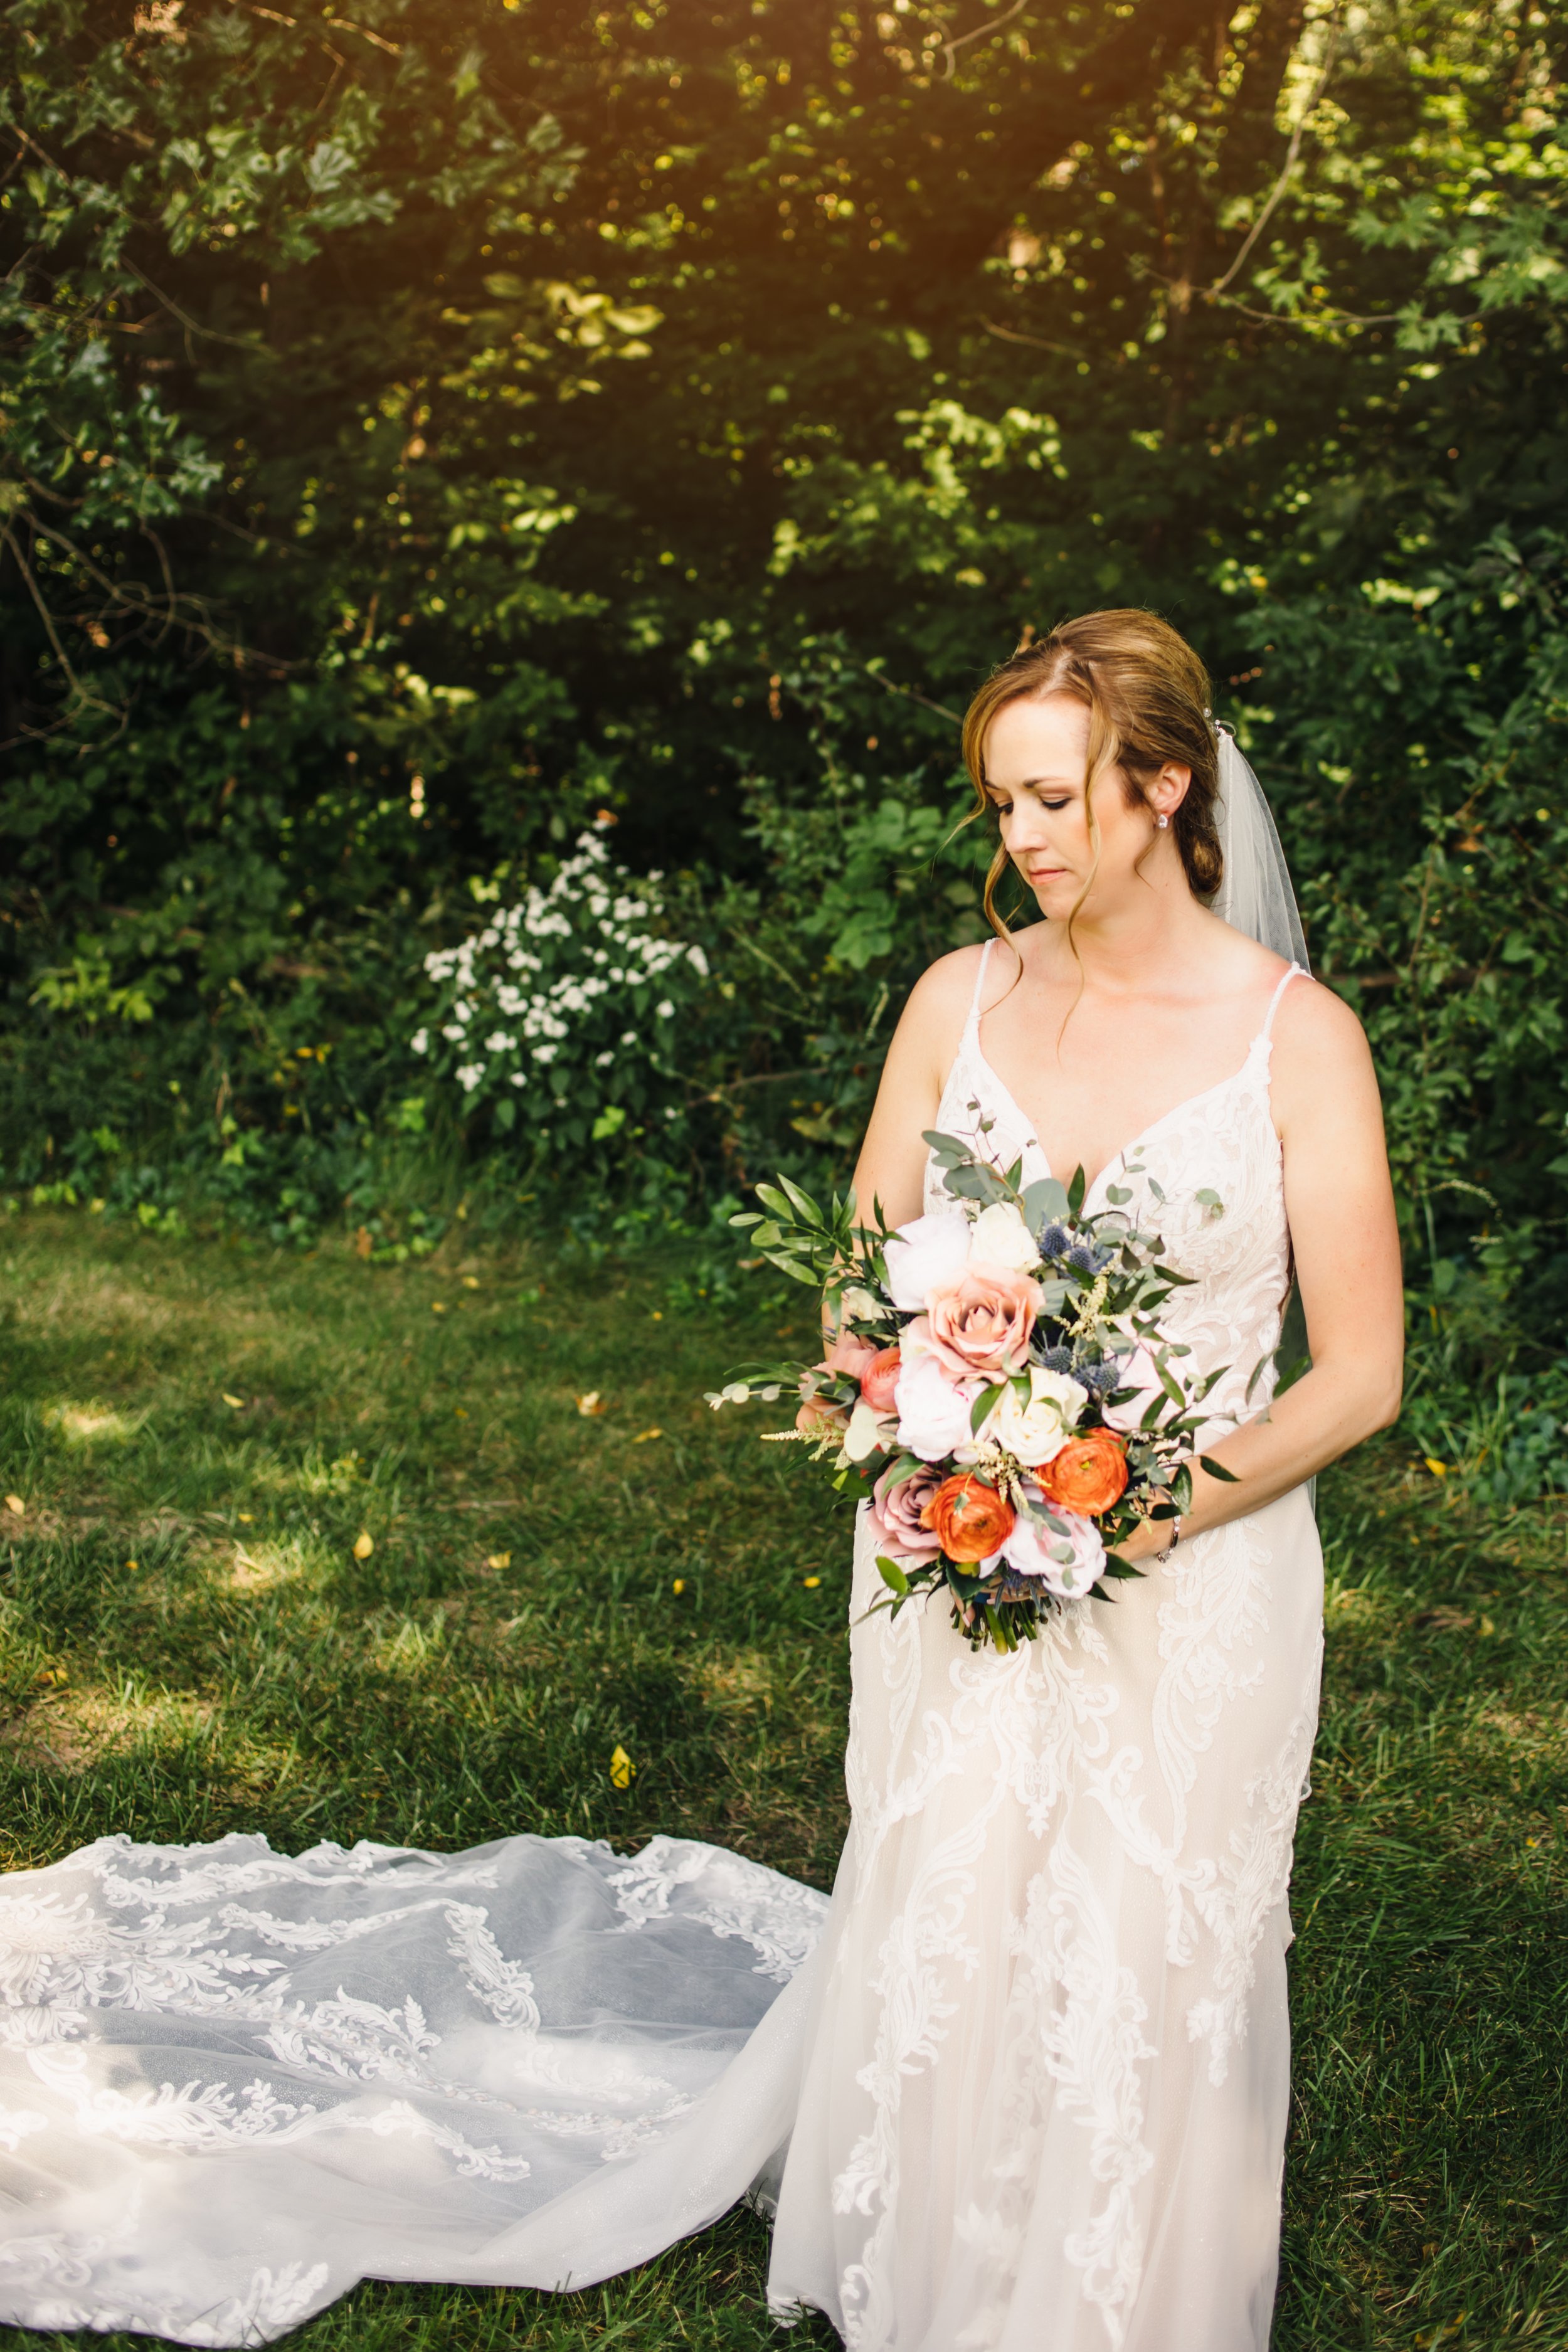  A bride in a spaghetti strap lace wedding gown with a white and orange summer bouquet by Teala Ward Photography. bridals Illinois Valley #TealaWardPhotography #IllinoisValleyPhotographer #summerwedding #TealaWardWeddings #Illinoisweddings  